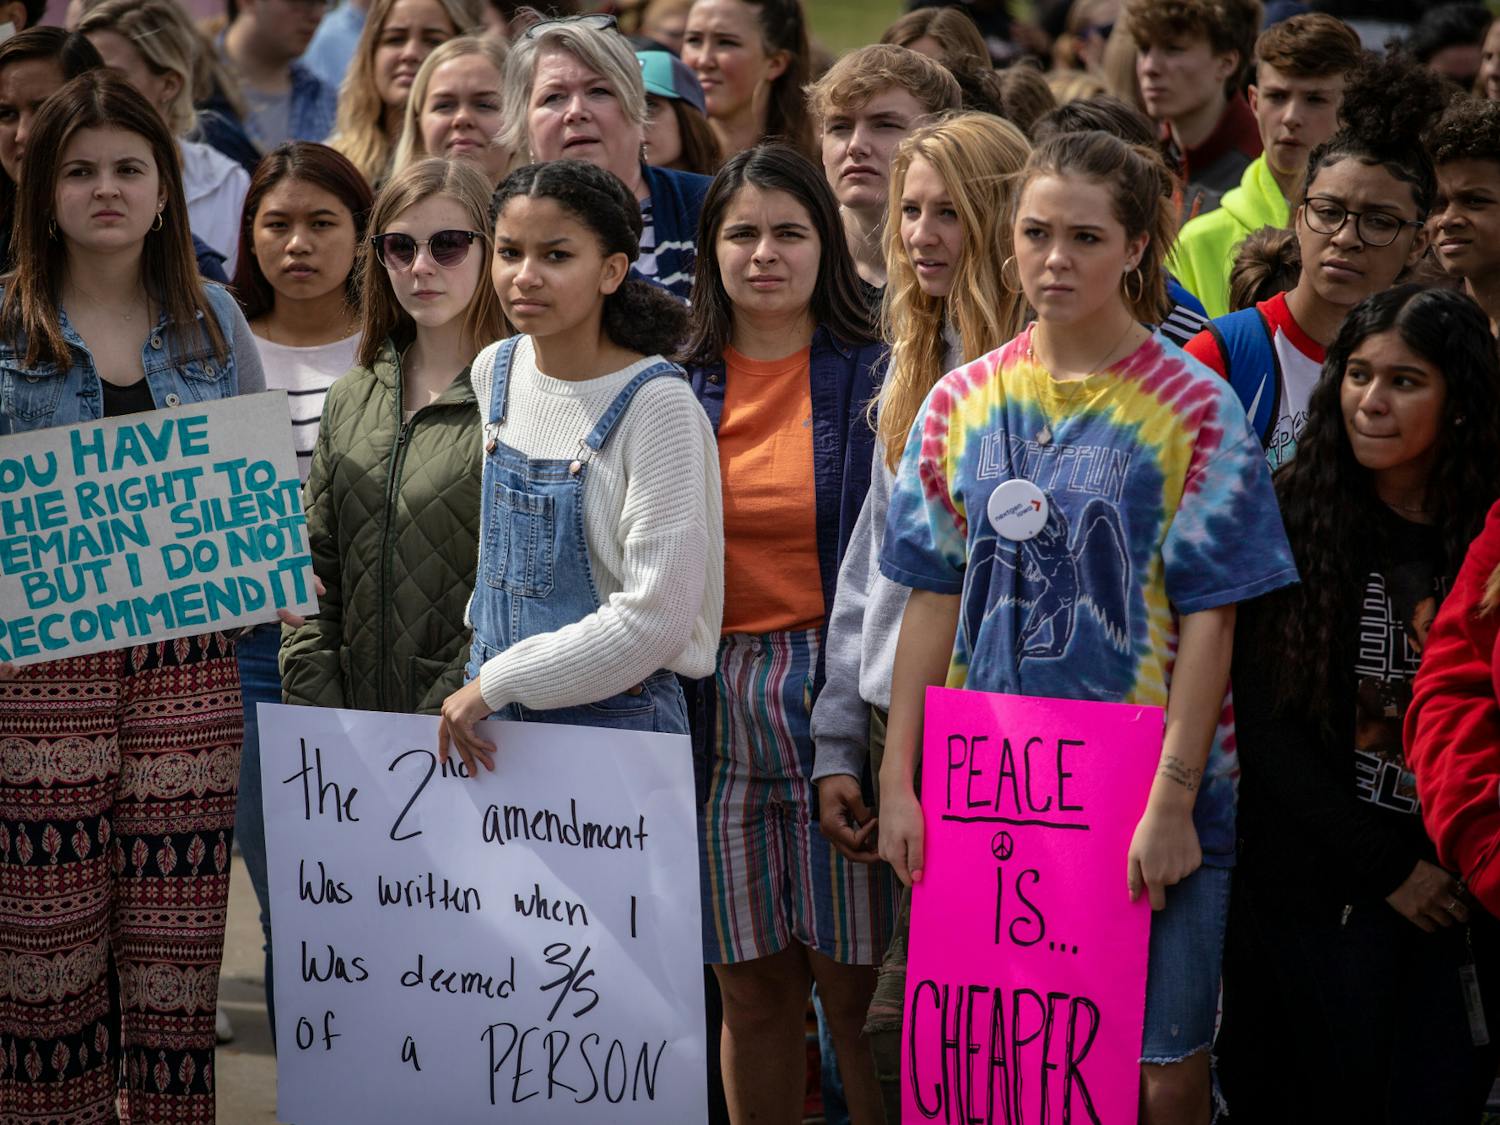 On March 27, an armed assailant forcibly invaded and opened fire at the Covenant School, an evangelical private academy in Nashville, Tennessee, further igniting the fight for gun legislation and restriction (Photo courtesy of Flickr/“National School Walkout” by Phil Roeder. April 20, 2018). 